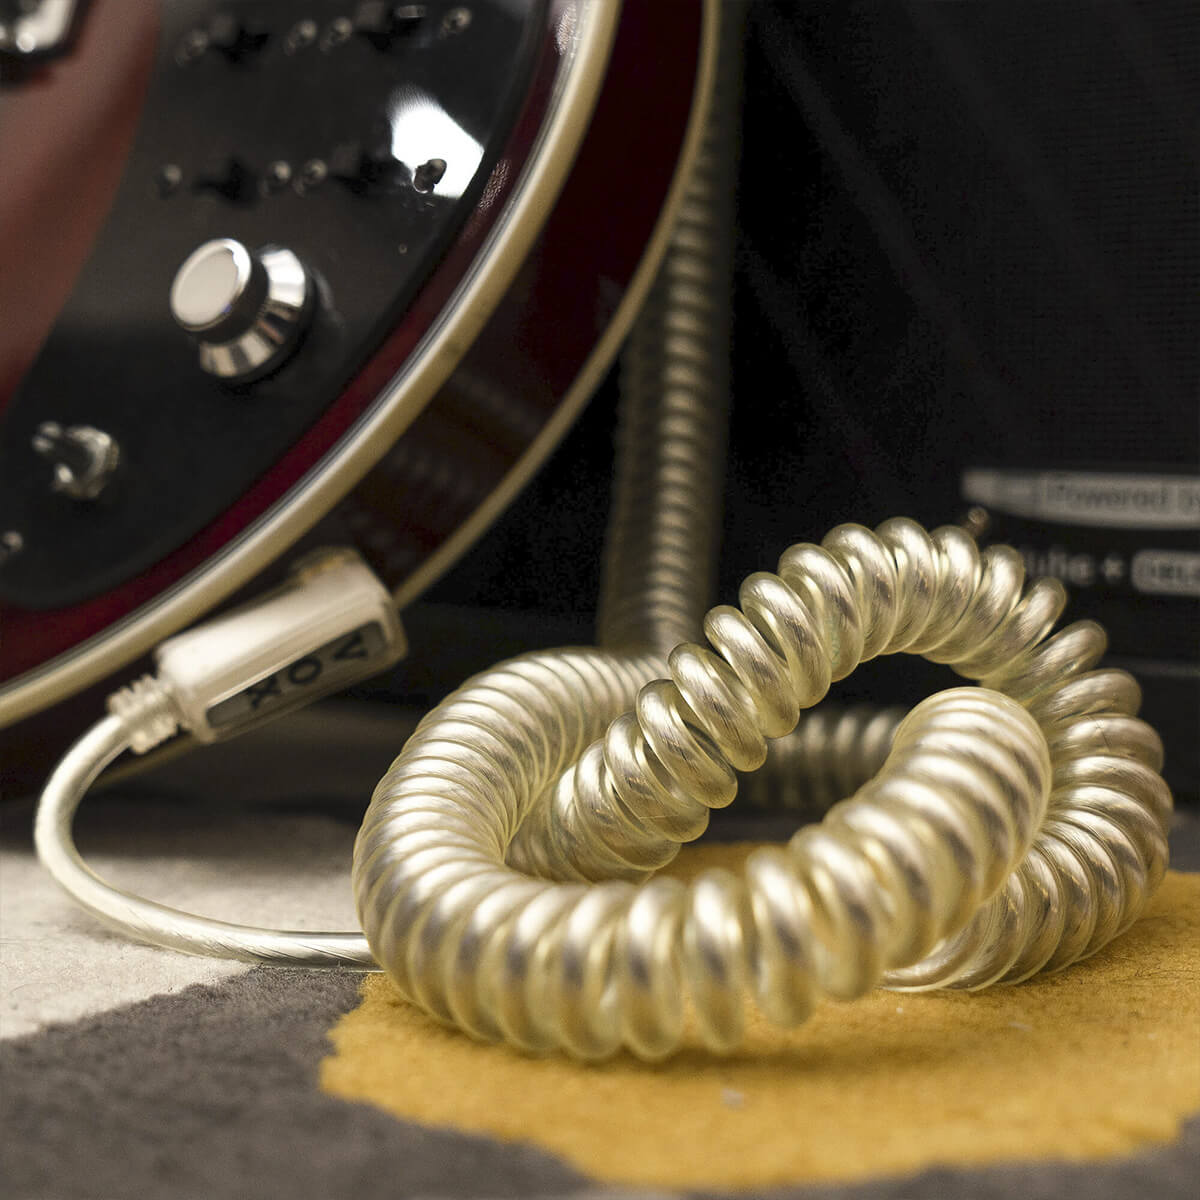 VCC Vintage Coiled Cable - Vox Amps